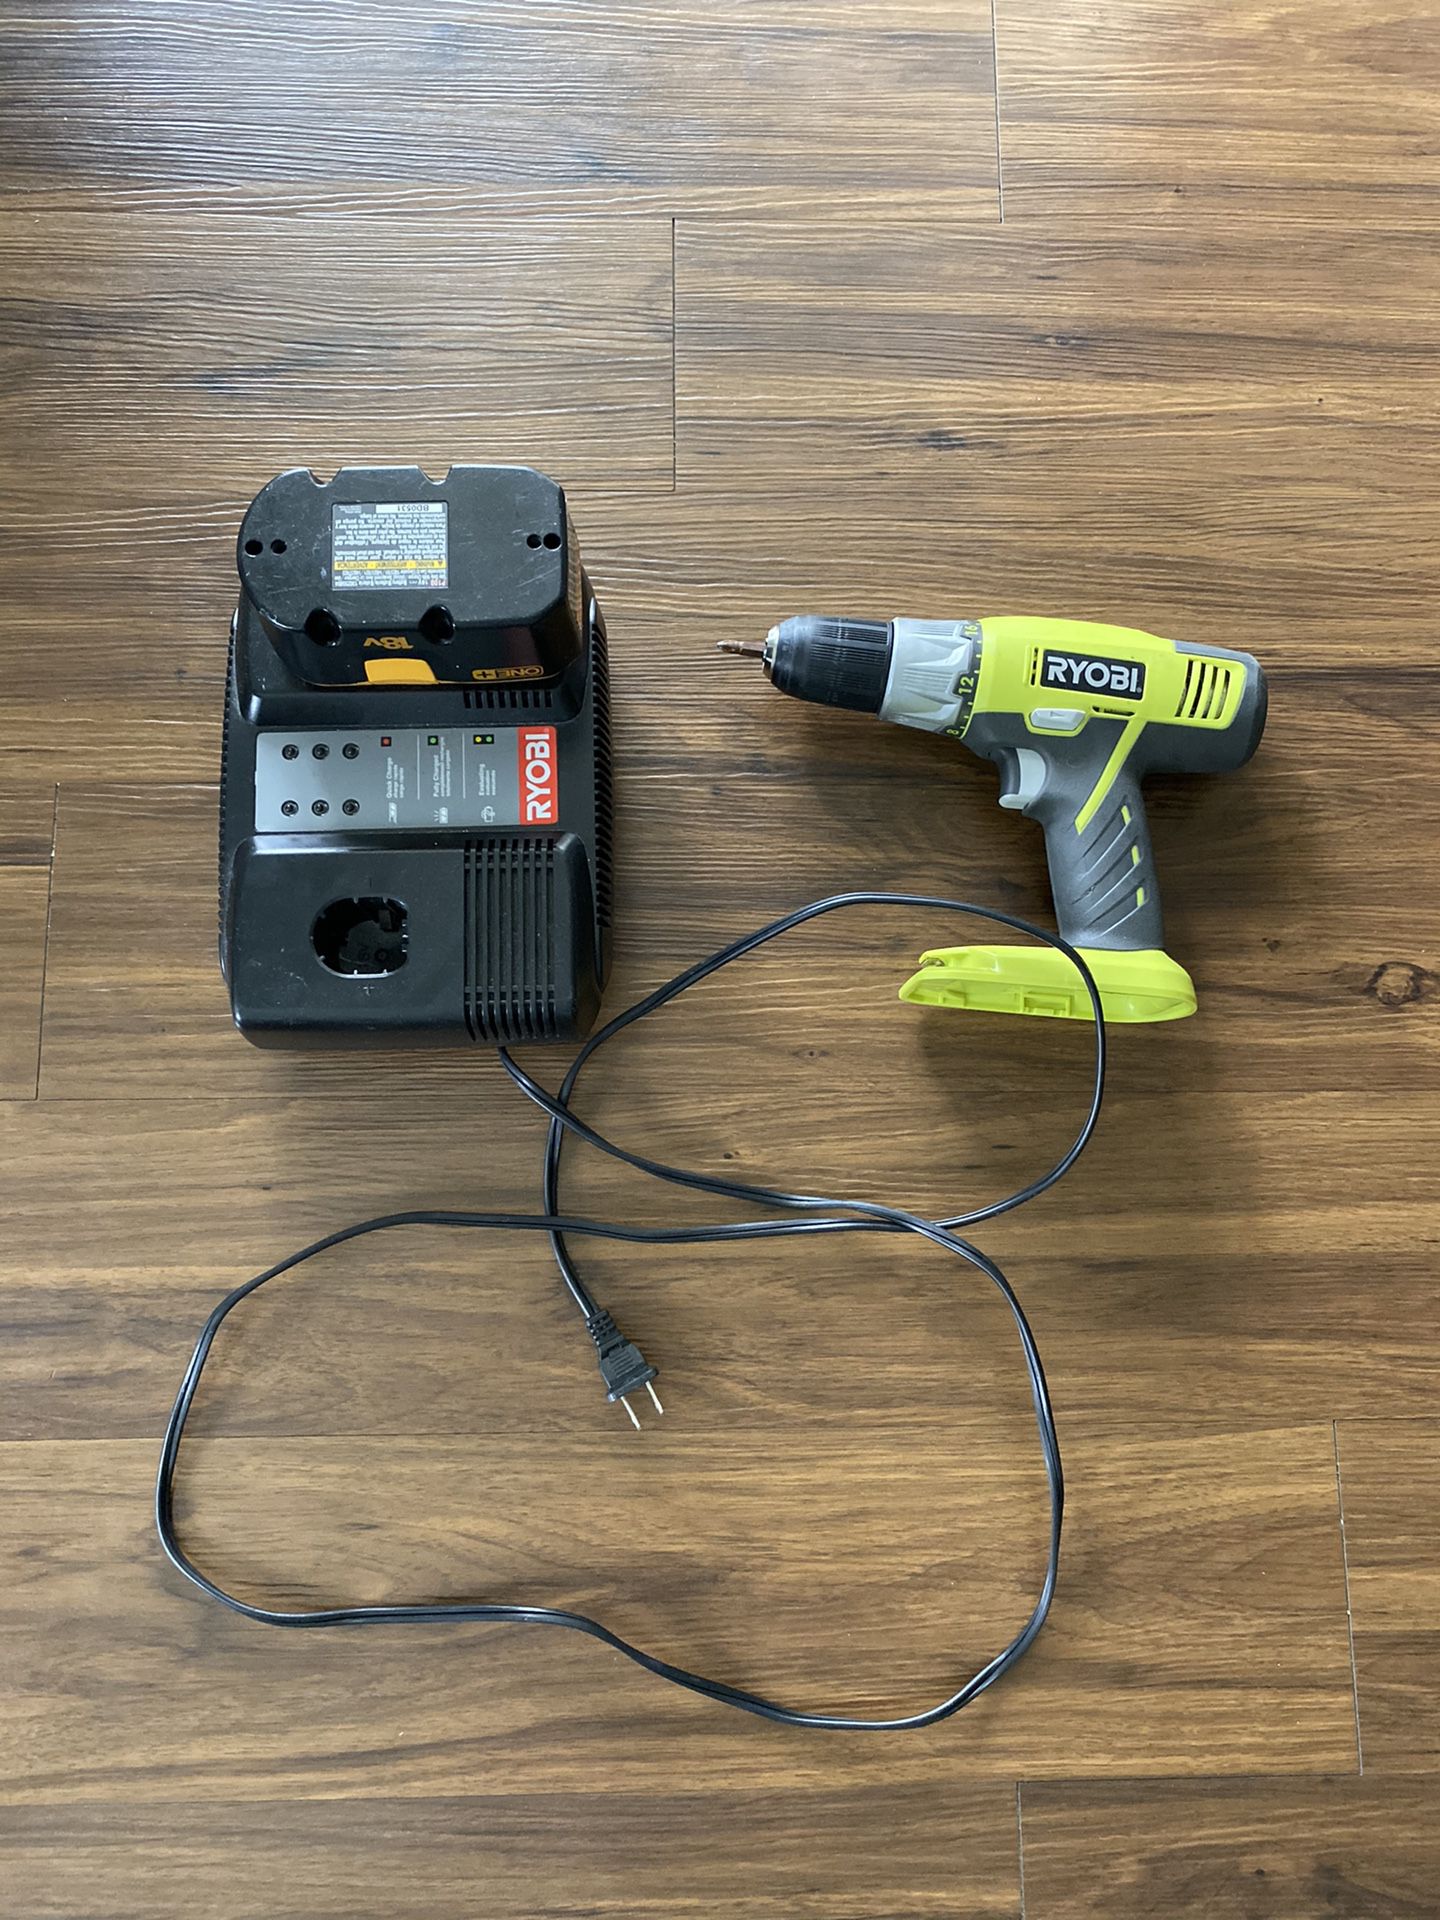 Ryobi Power Drill and Charger